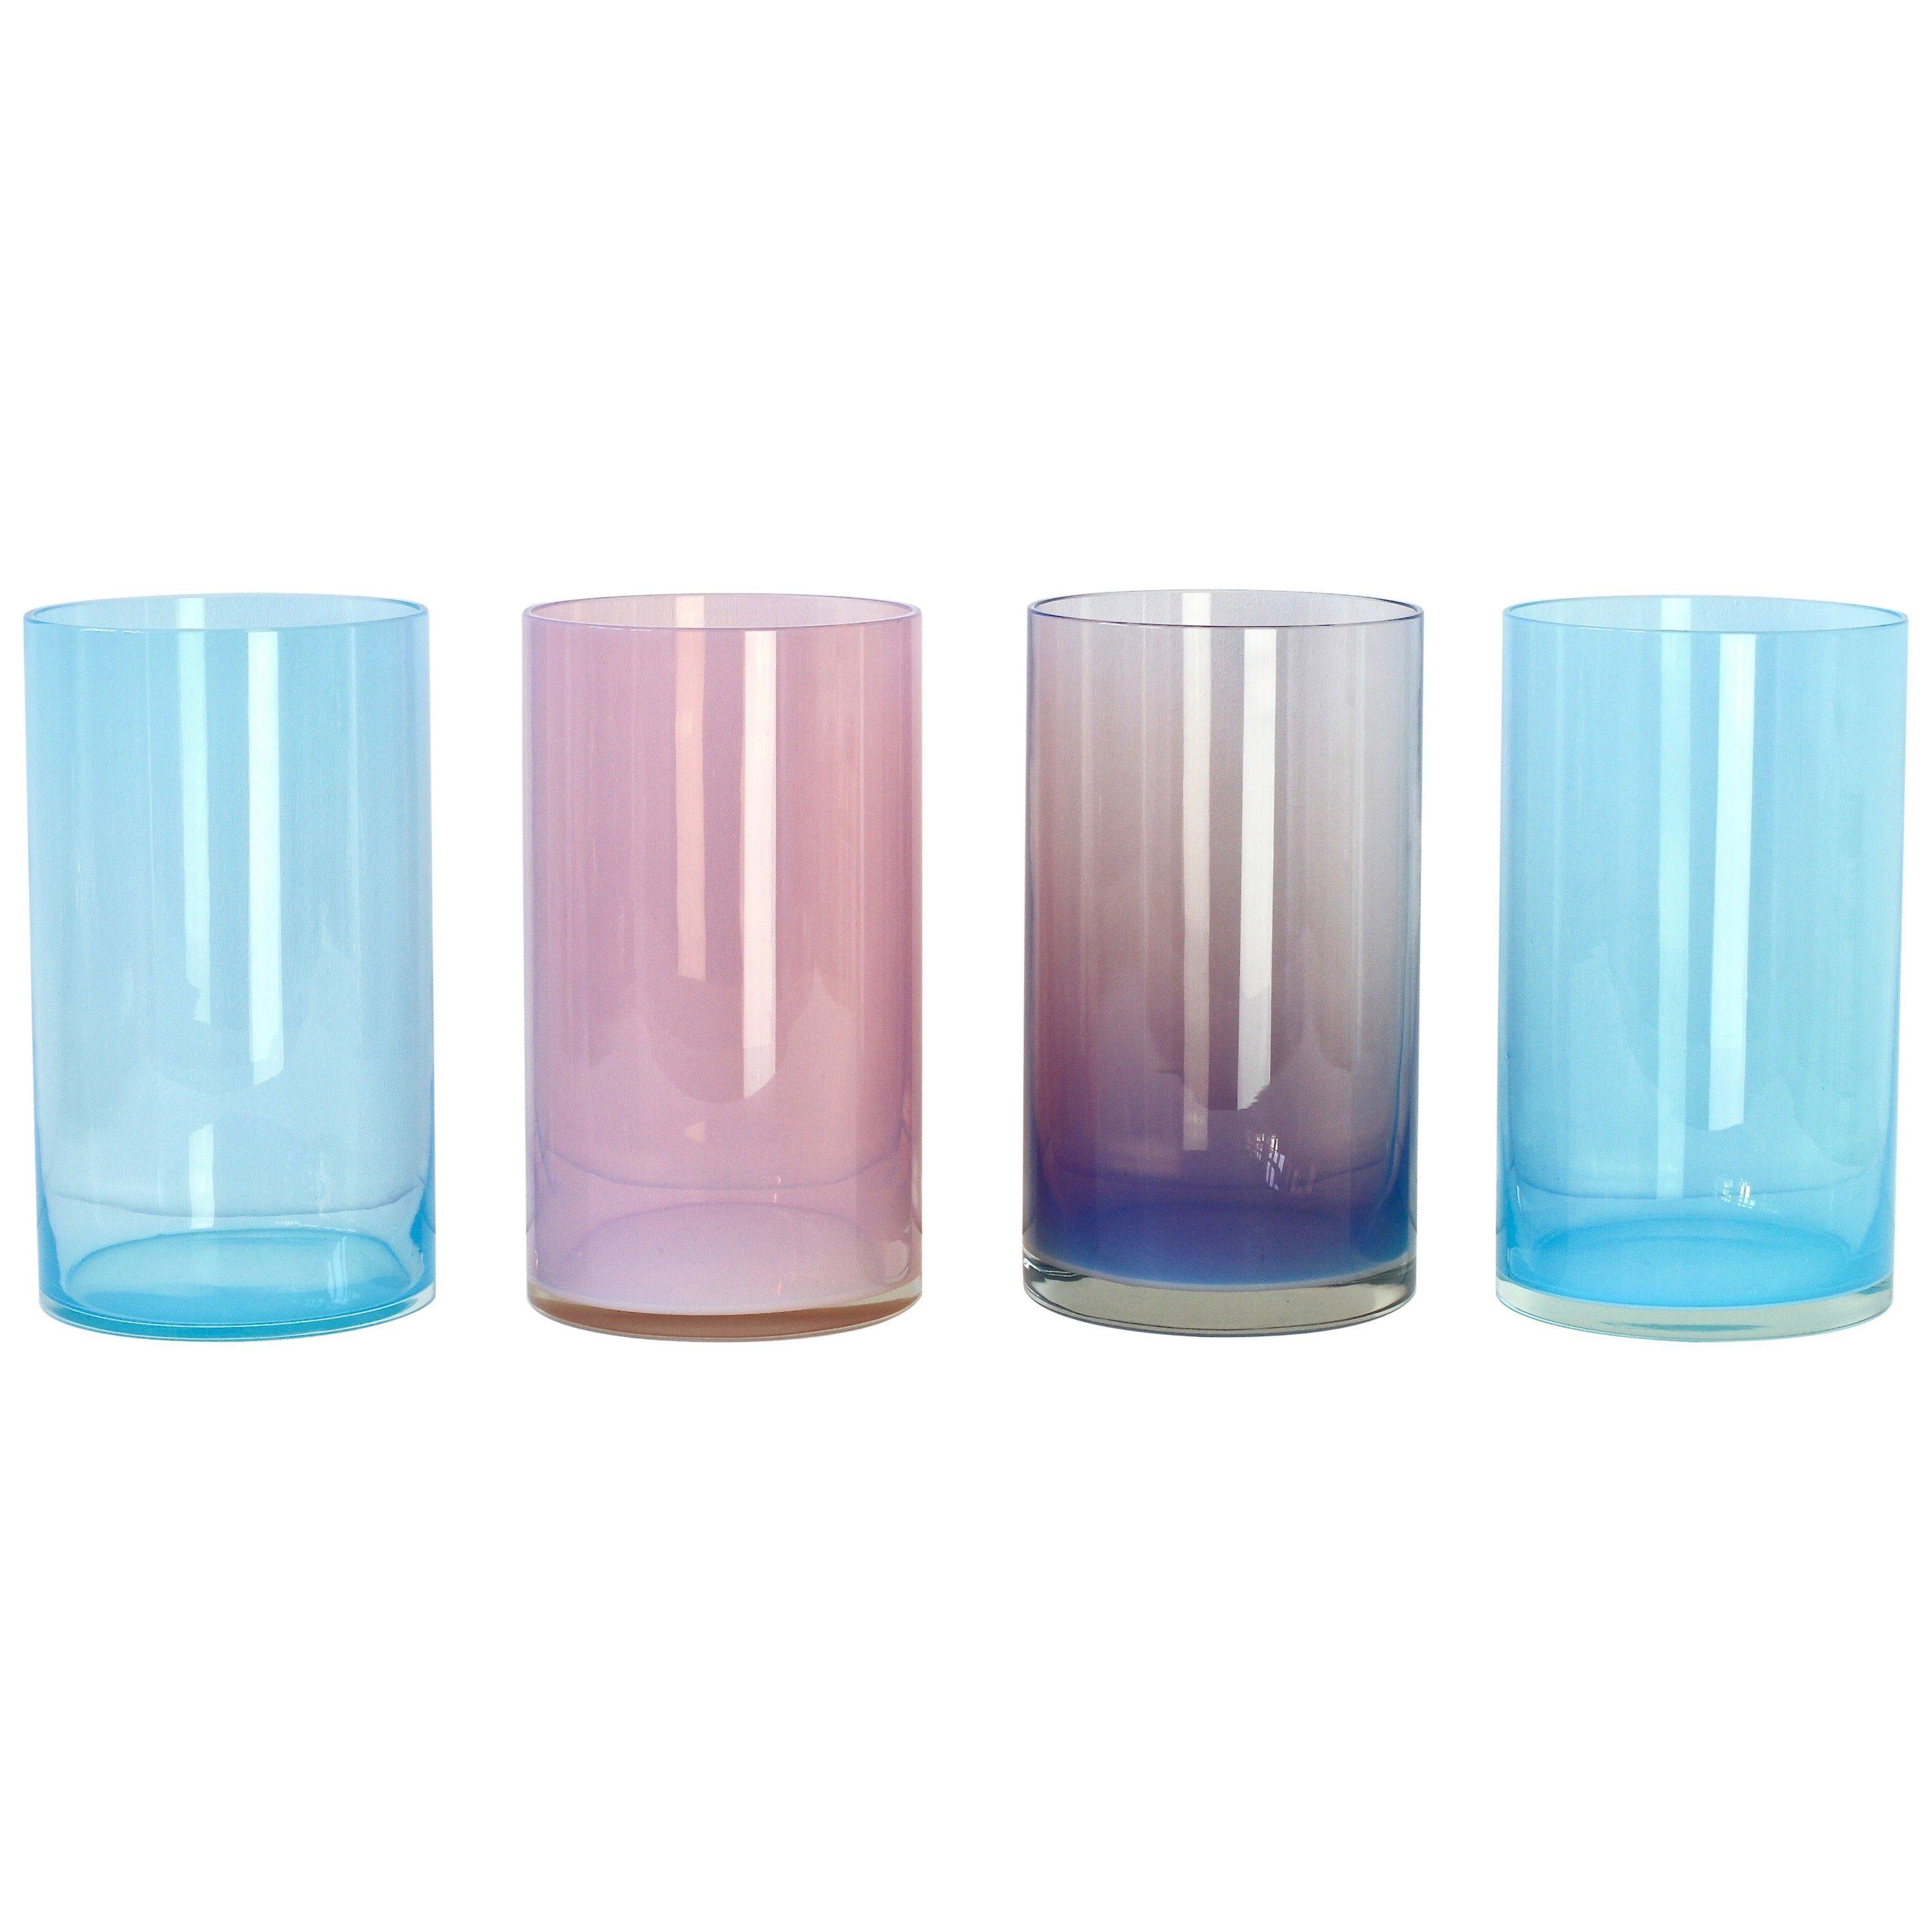 Antonio da Ros for Cenedese Murano Glass Set of Vibrantly Colored Glass Vases For Sale